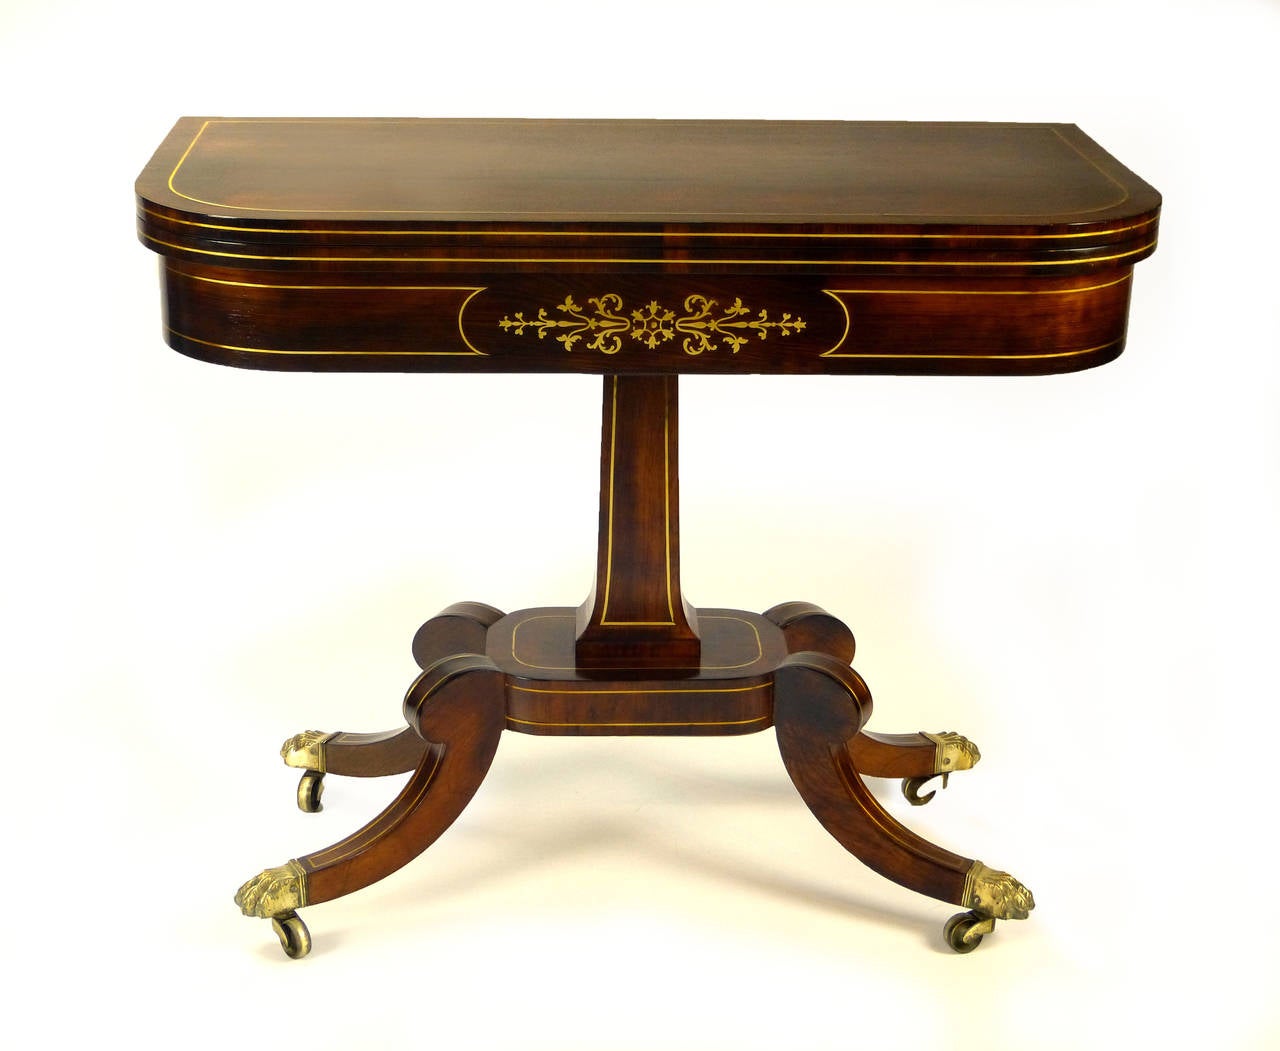 Elegant Regency games / card table created entirely of Indian rosewood and profusely brass inlaid throughout. The two tops turn 90º and unfold book style revealing a newly upholstered Ralph Lauren distressed leather playing surface. Below the